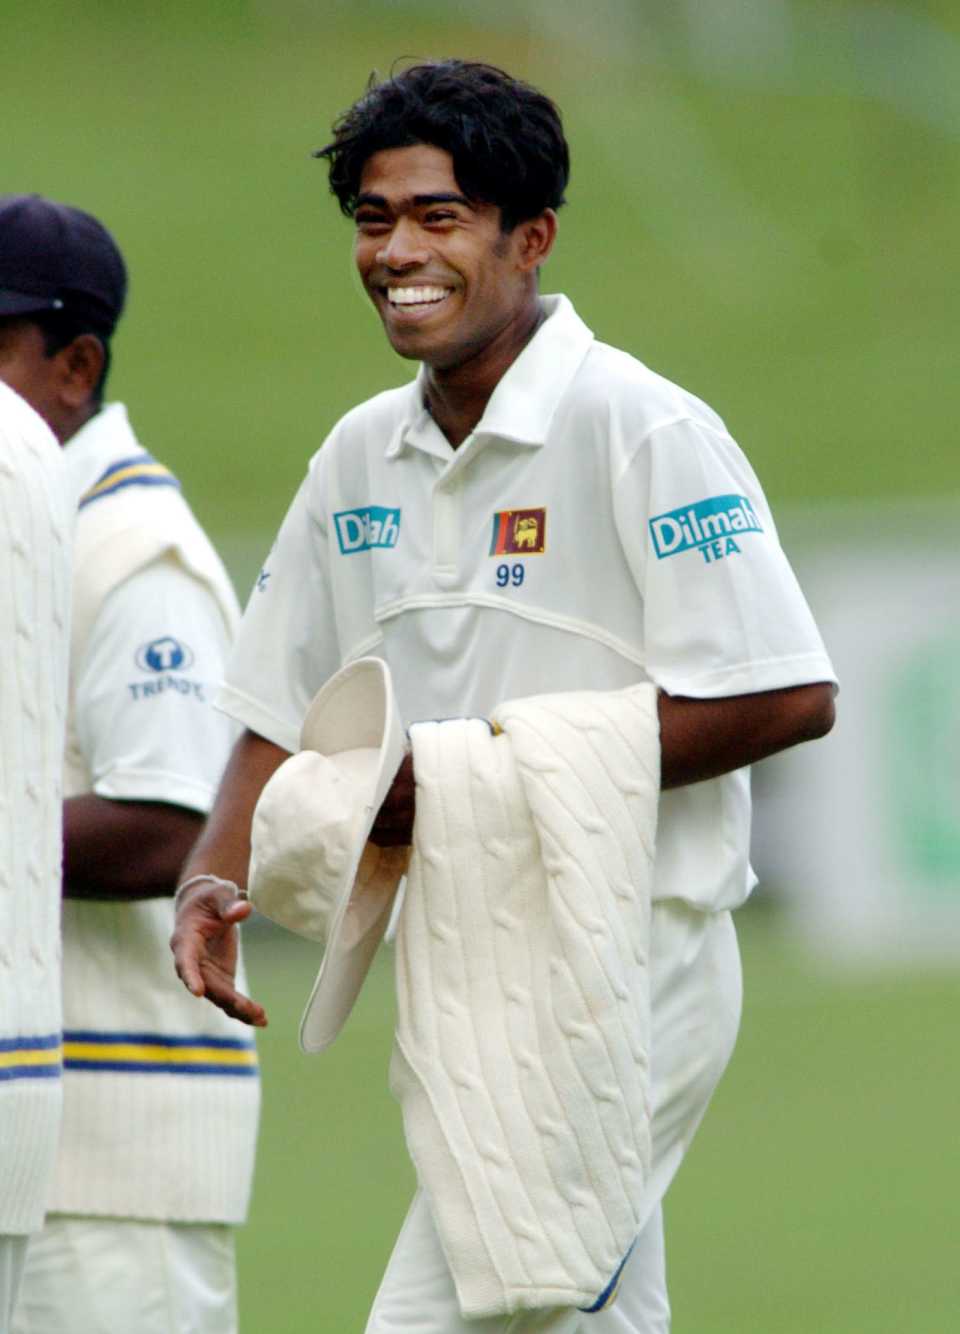 Lasith Malinga is all smiles after he took his first five-wicket haul, fifth day, first cricket Test, New Zealand vs Sri Lanka, McLean Park, Napier, April 08, 2005.